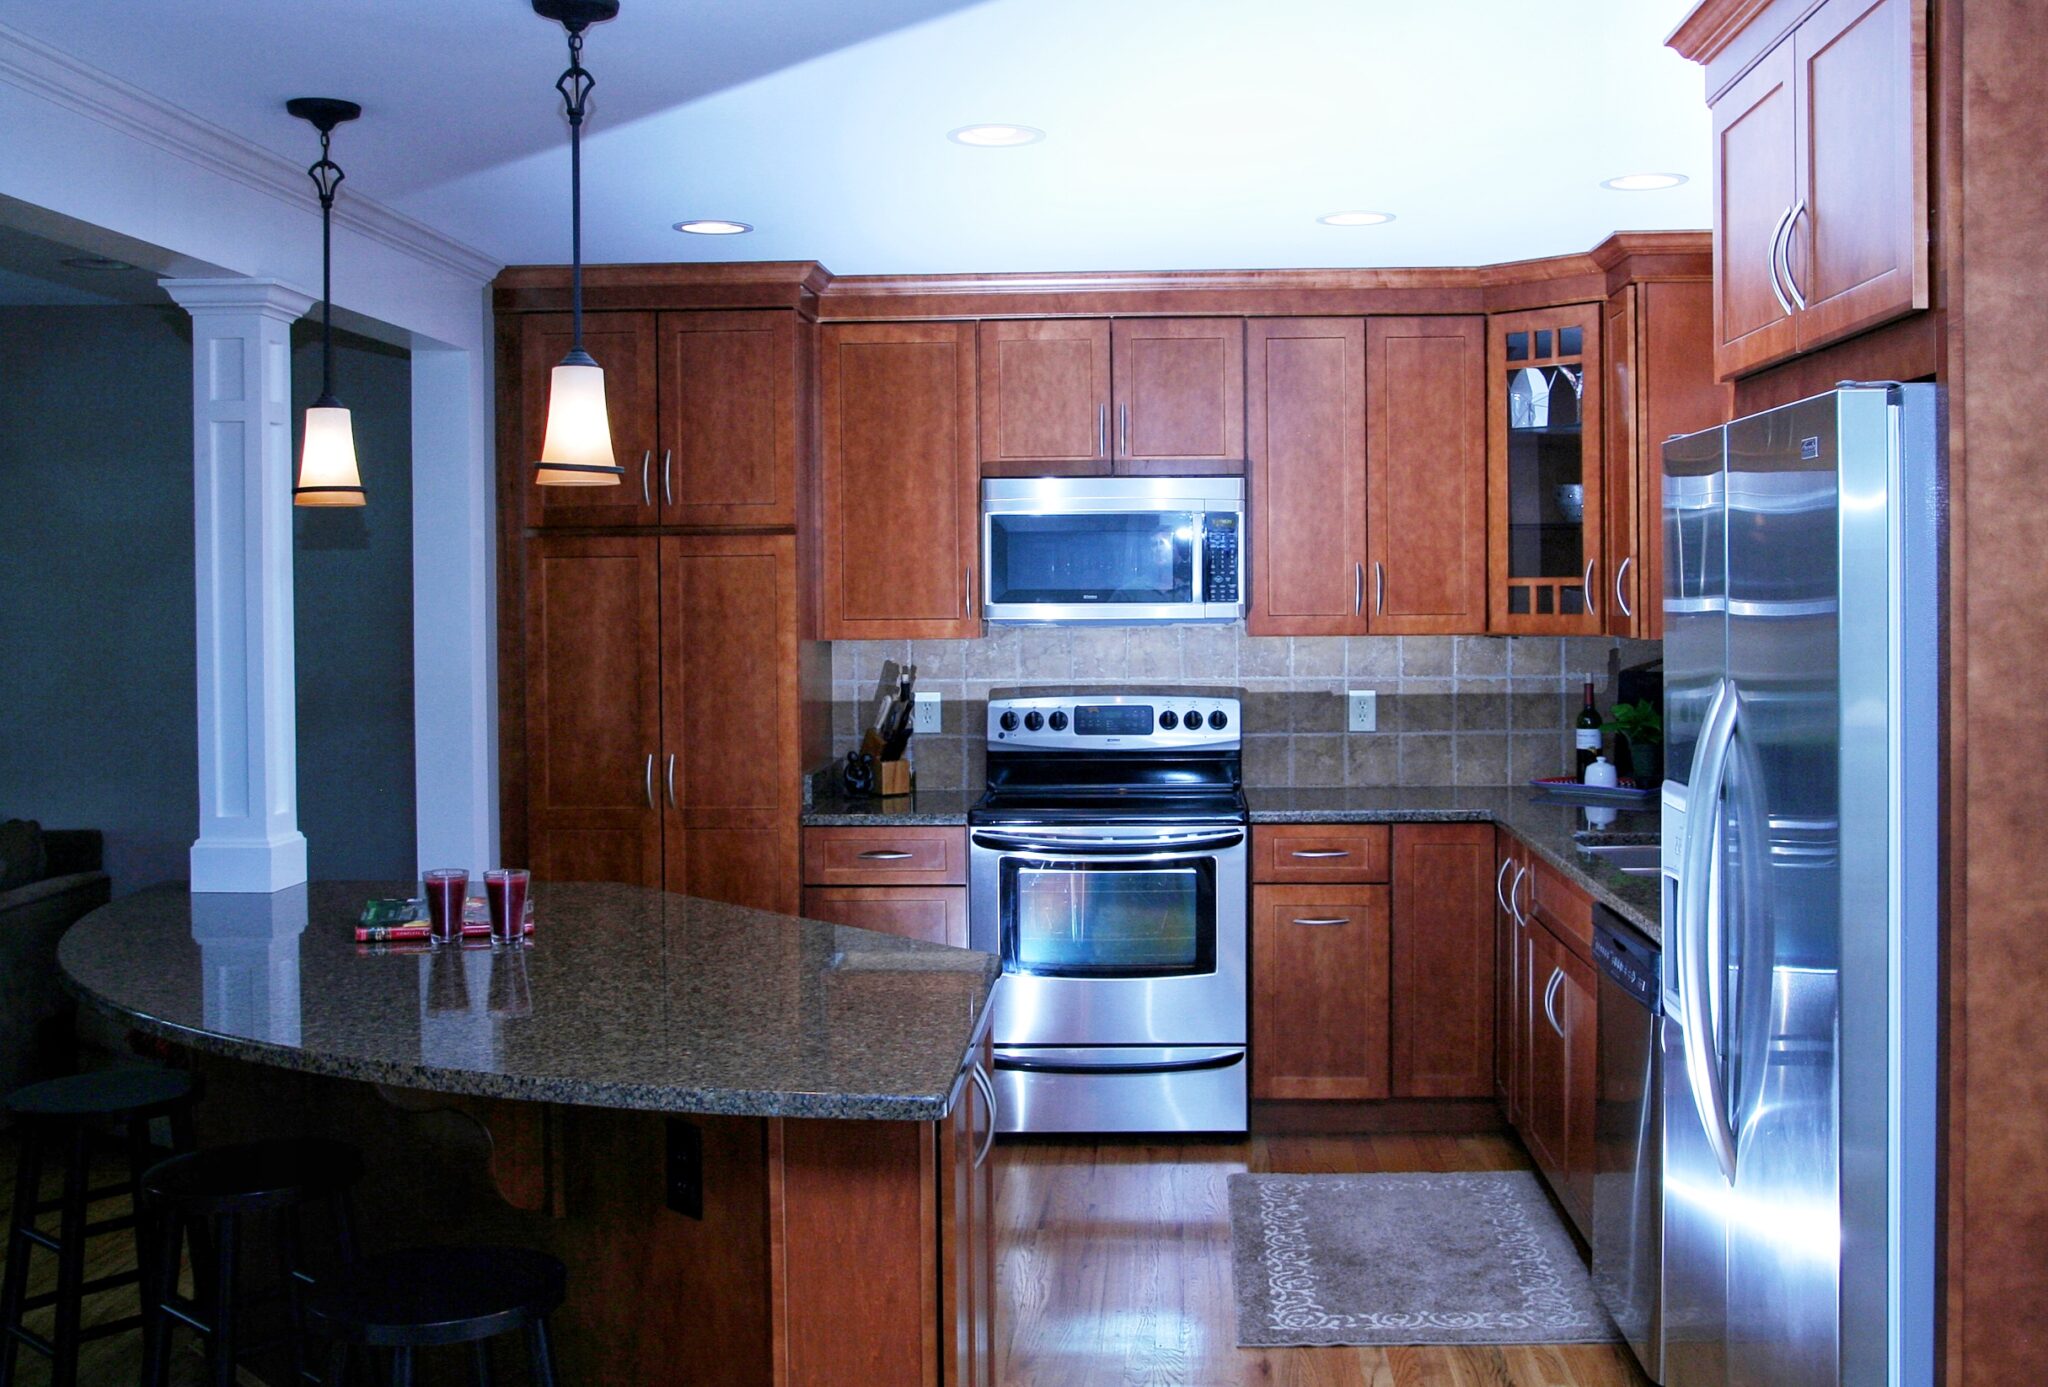 Beautiful kitchen - Evendale home remodel